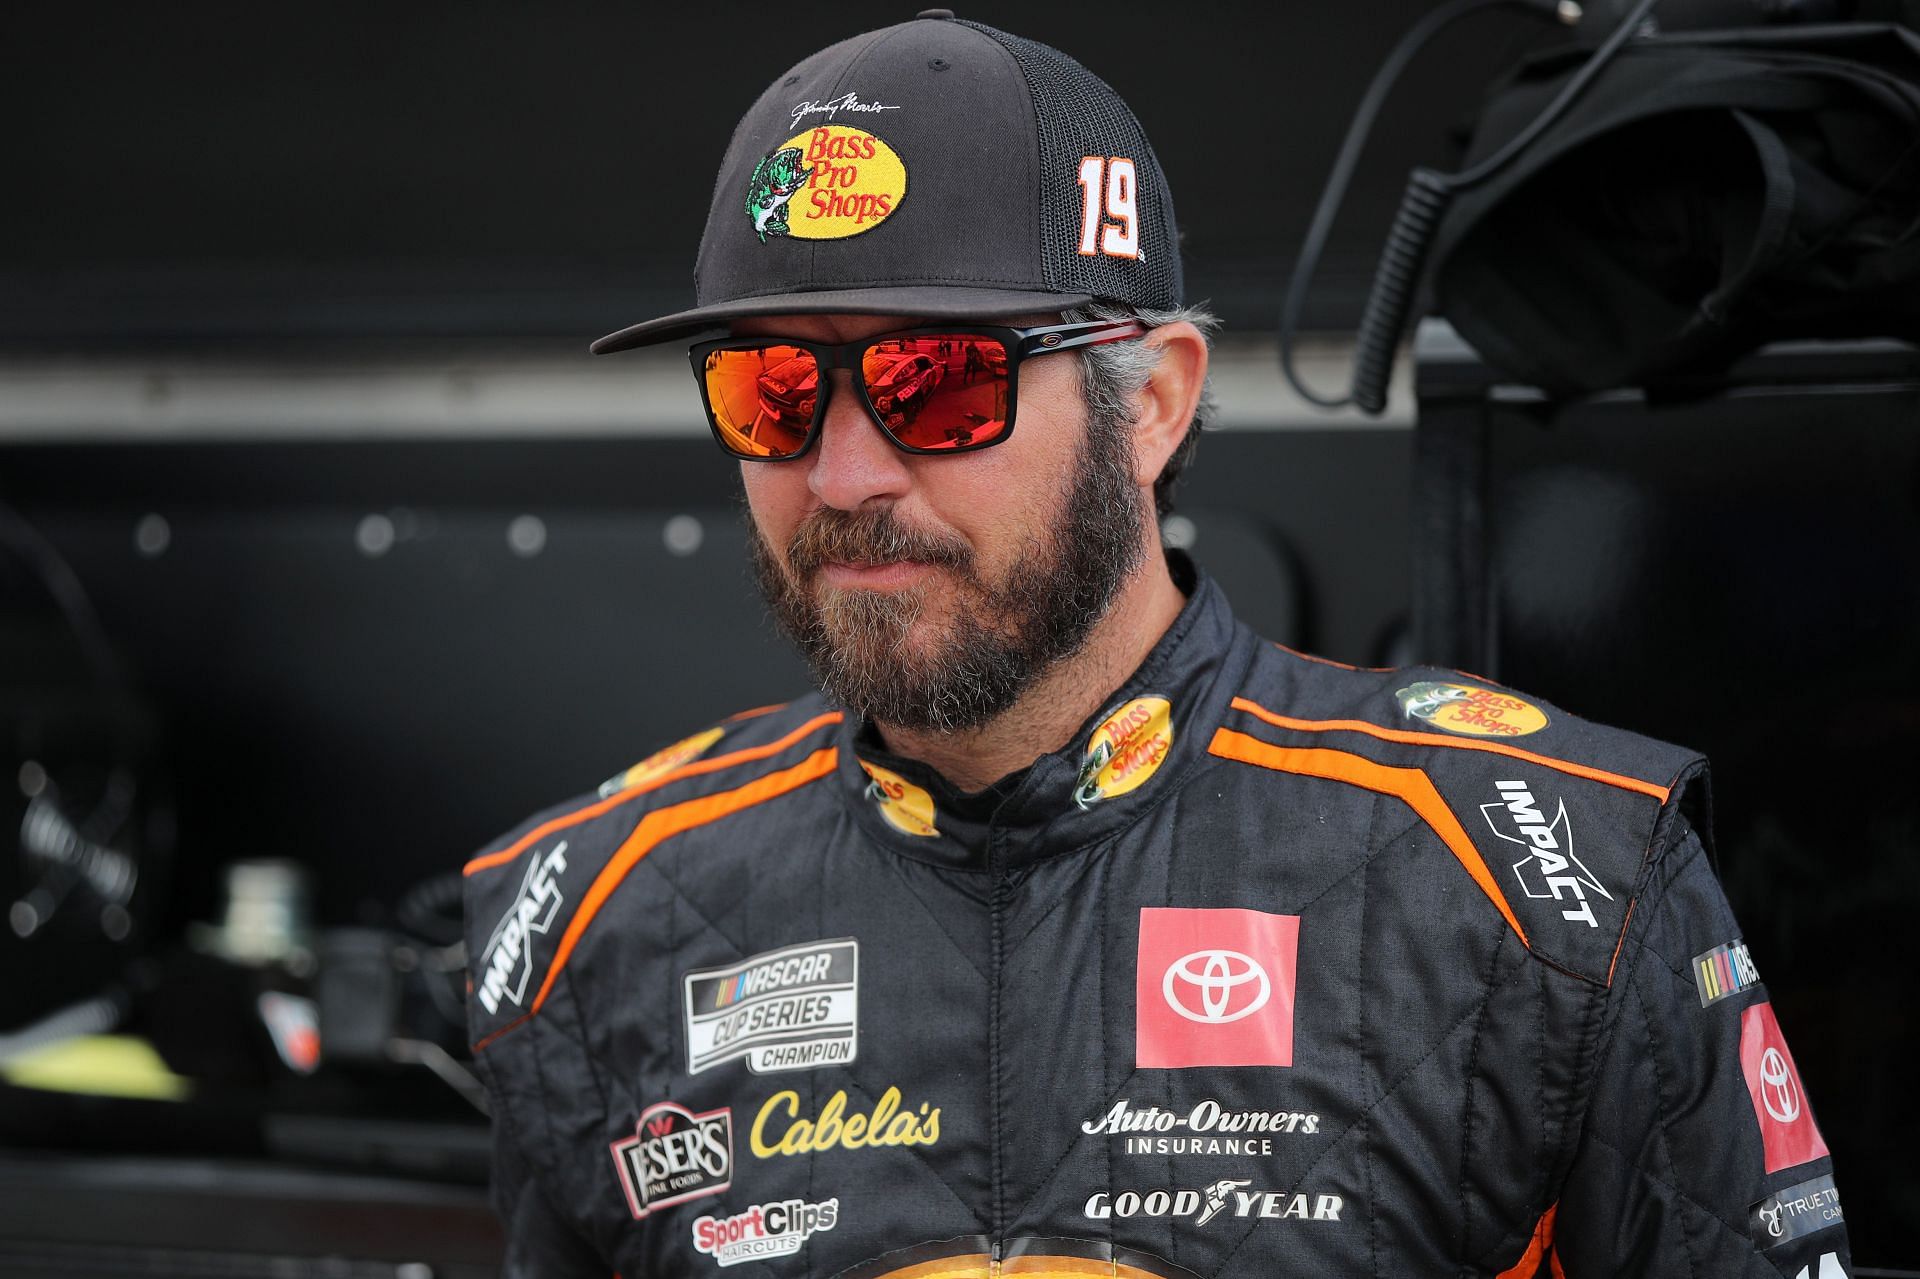 Martin Truex Jr. waits on the grid during practice for the NASCAR Cup Series Blue-Emu Maximum Pain Relief 400 at Martinsville Speedway.